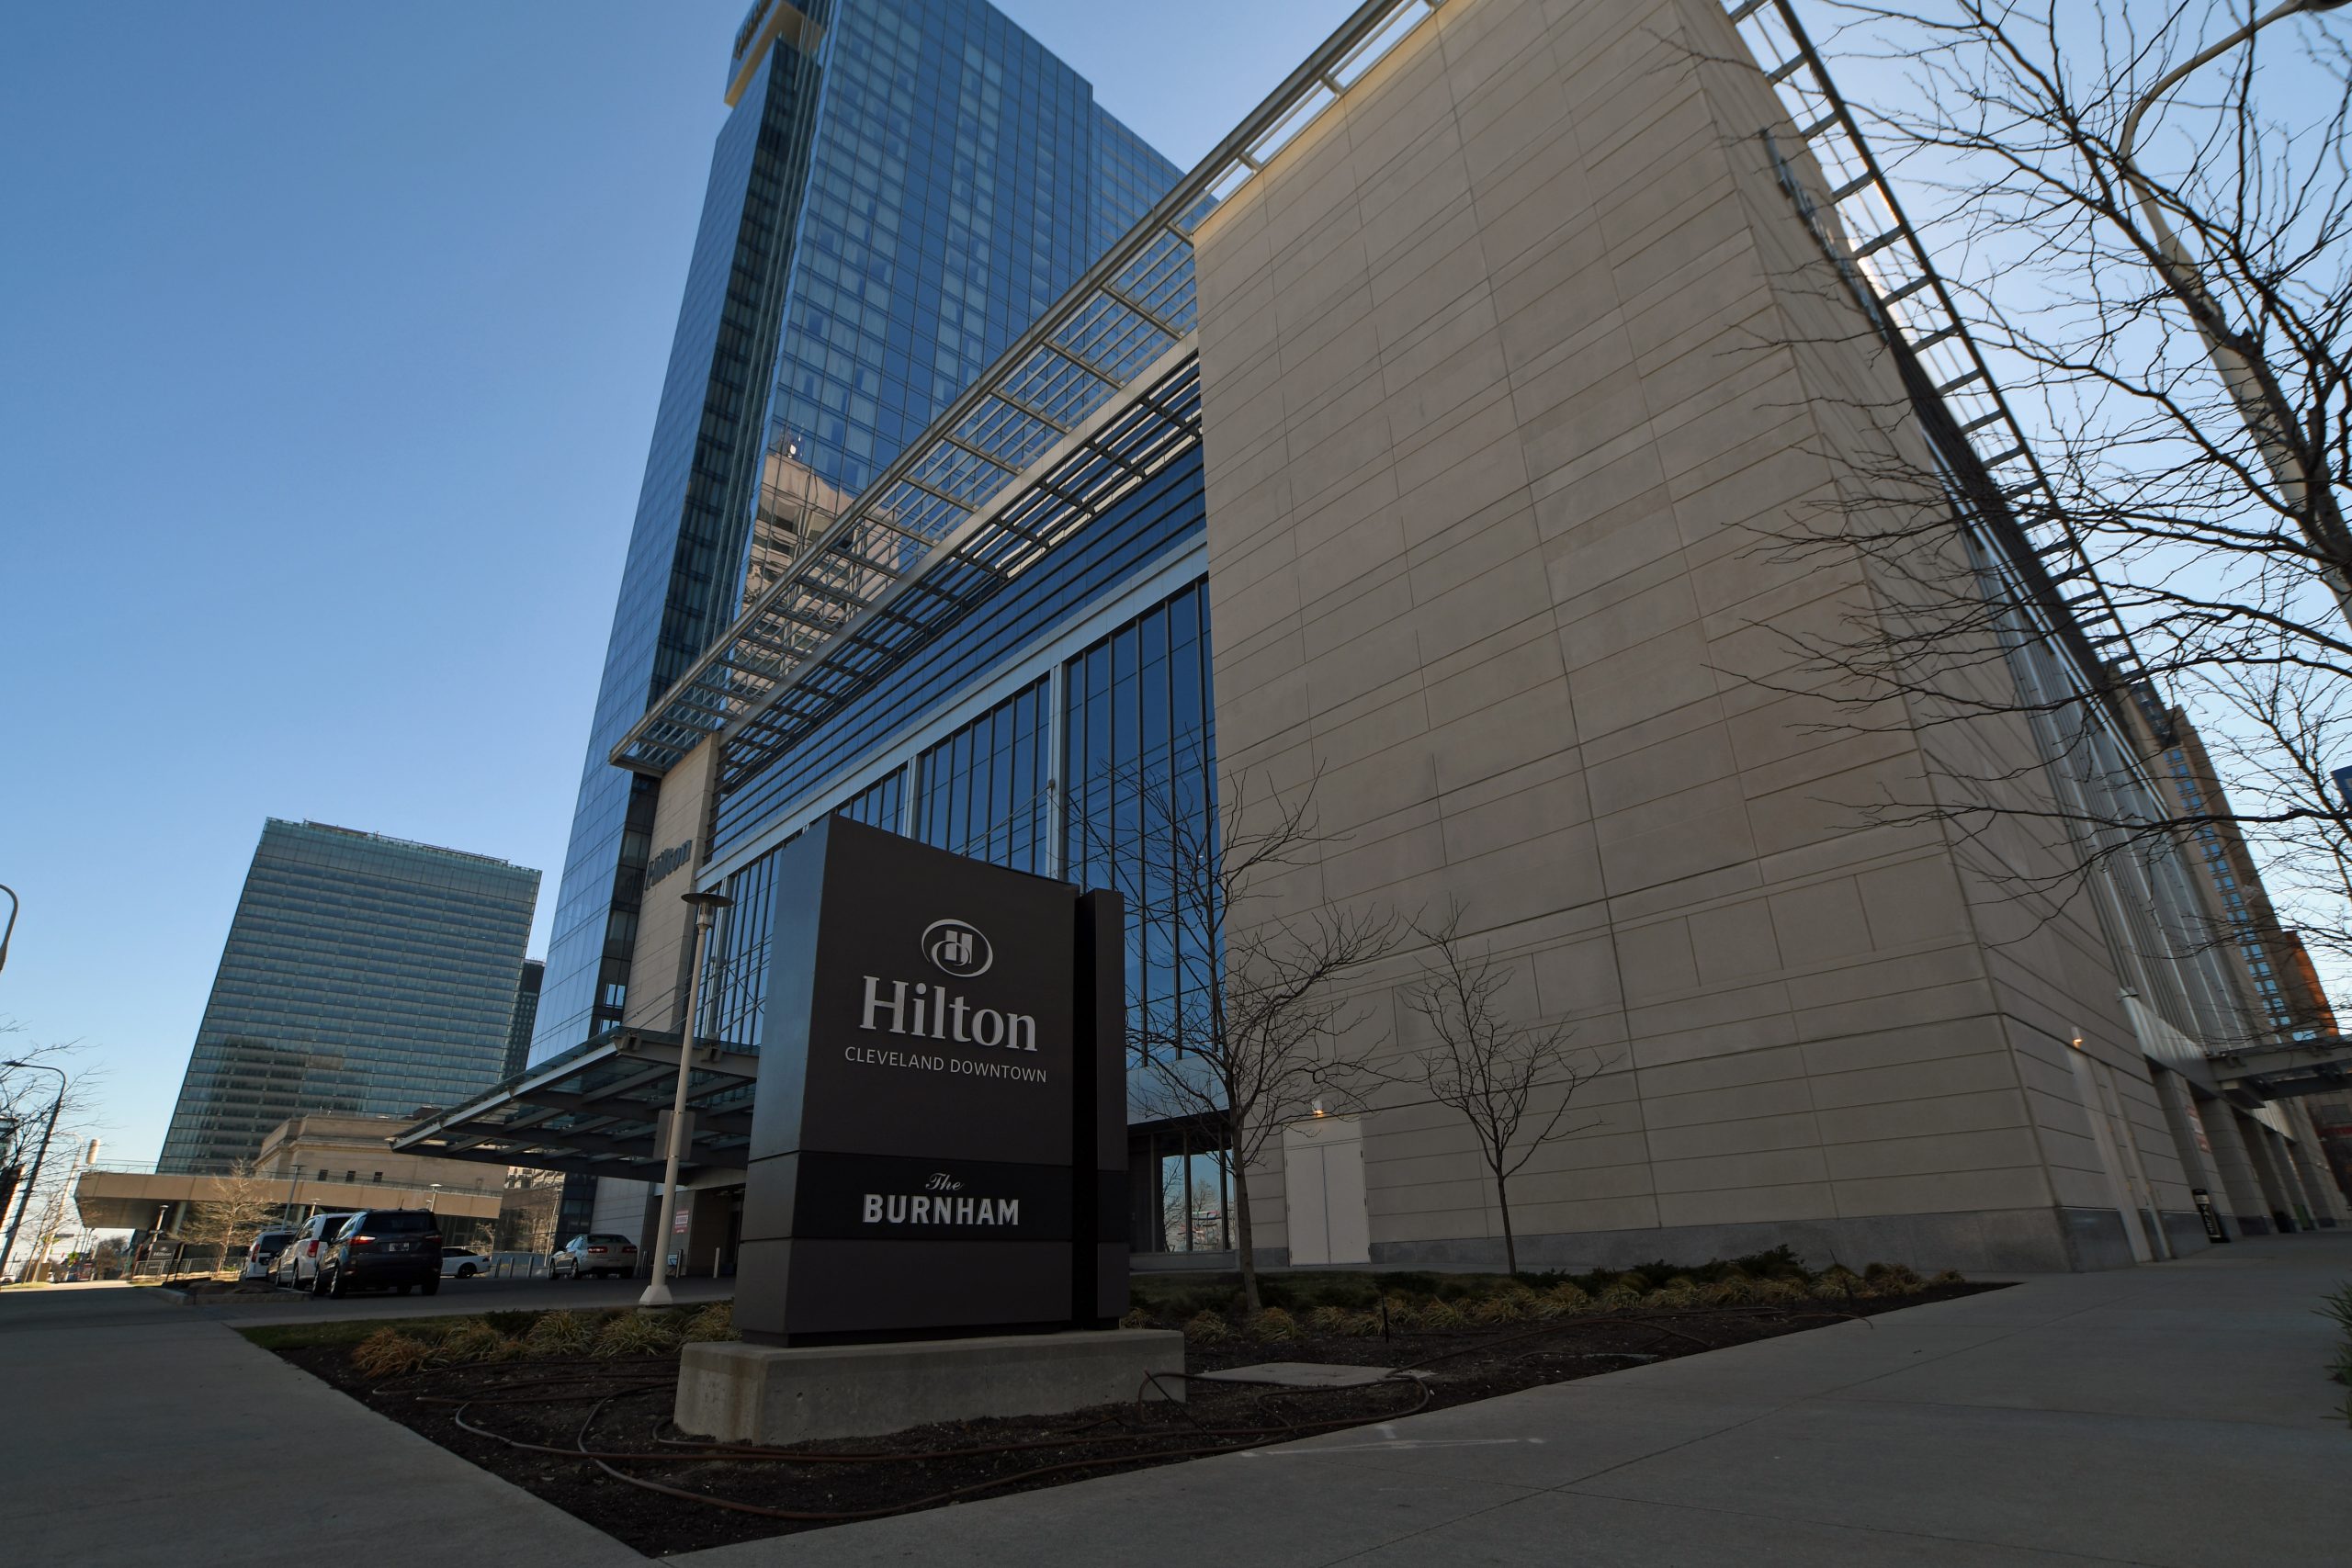 Exterior of Hilton hotel. The left side of the hotel's exterior is mostly glass and is very tall, while the right side is shorter and a combination of glass and then concrete.